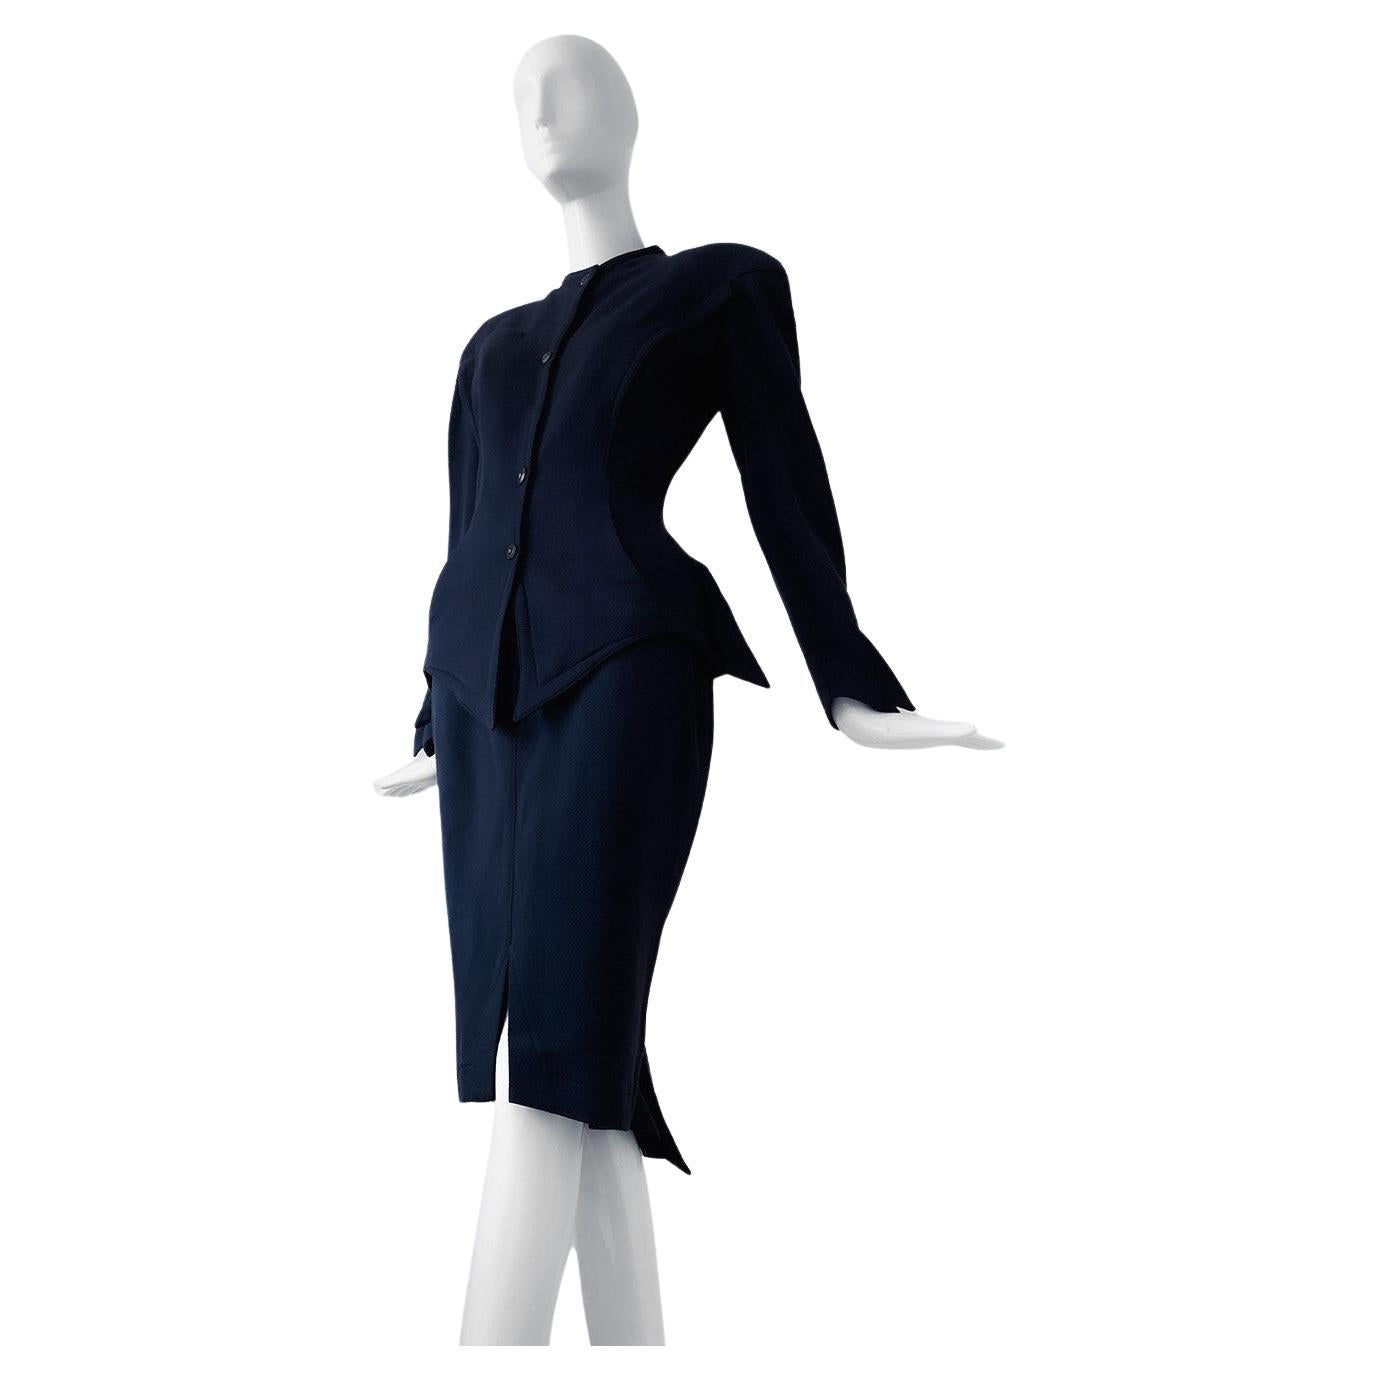 Thierry Mugler Rare Dramatic Suit Skirtsuit Silhouette Wool Blazer Skirt 80s For Sale